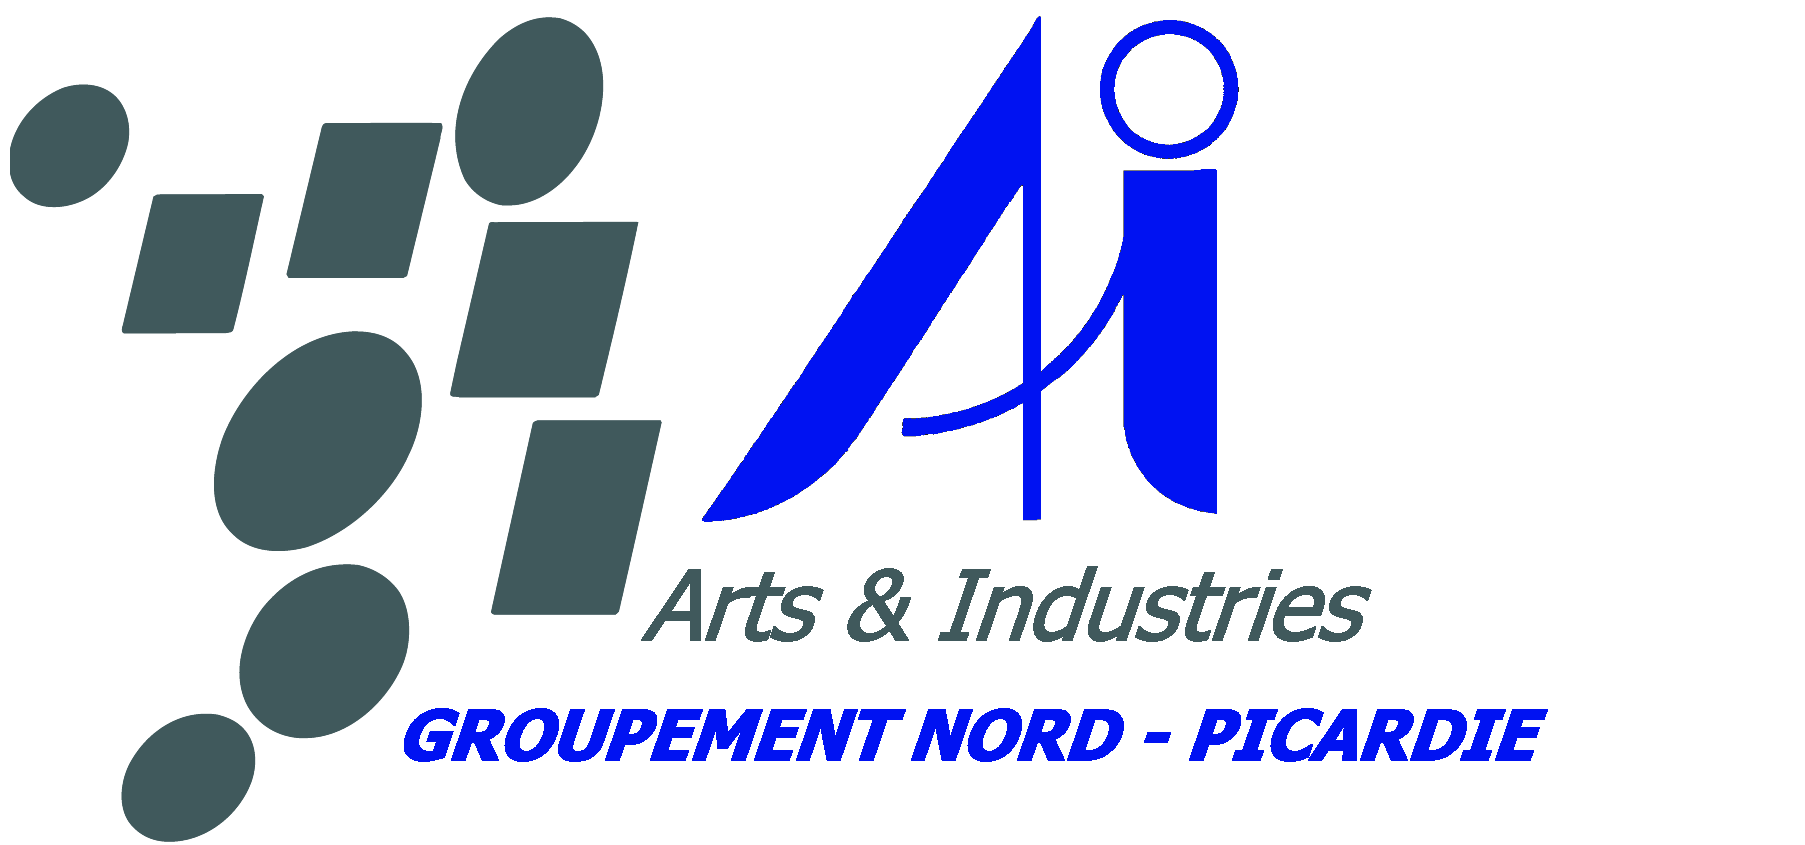 ::documents:associations:insa-ai:1_nord-picardie:a&i nord-picardie:infos a&i région:logo:logo ai - gpt nord picardie.gif